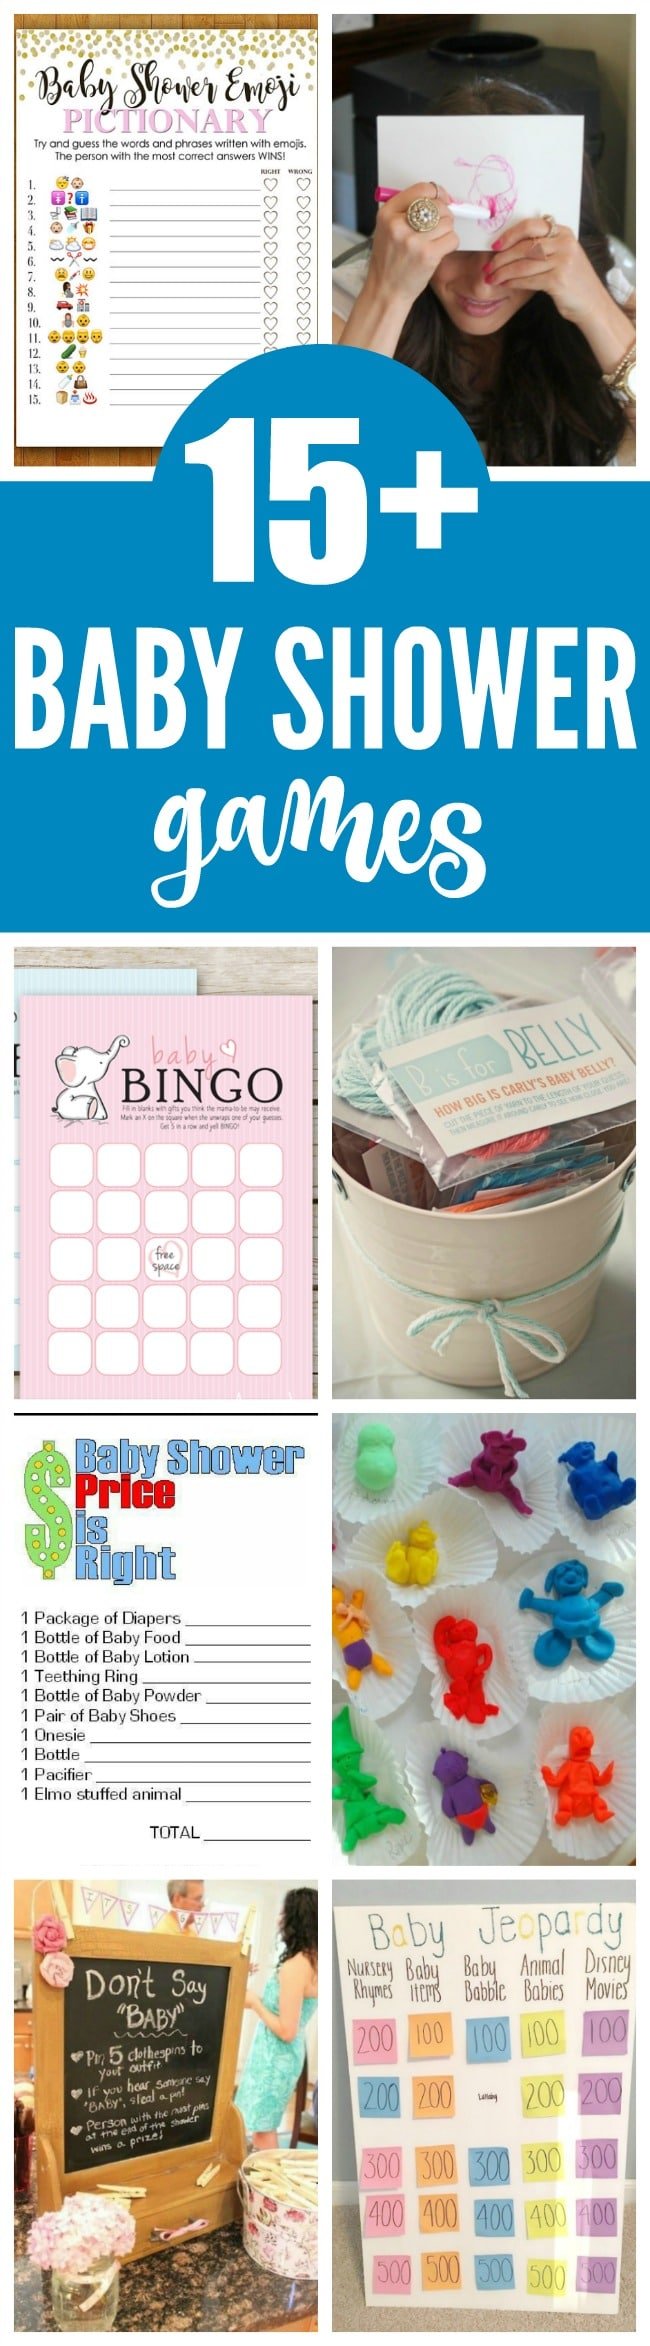 15 Entertaining Baby Shower Games - Pretty My Party